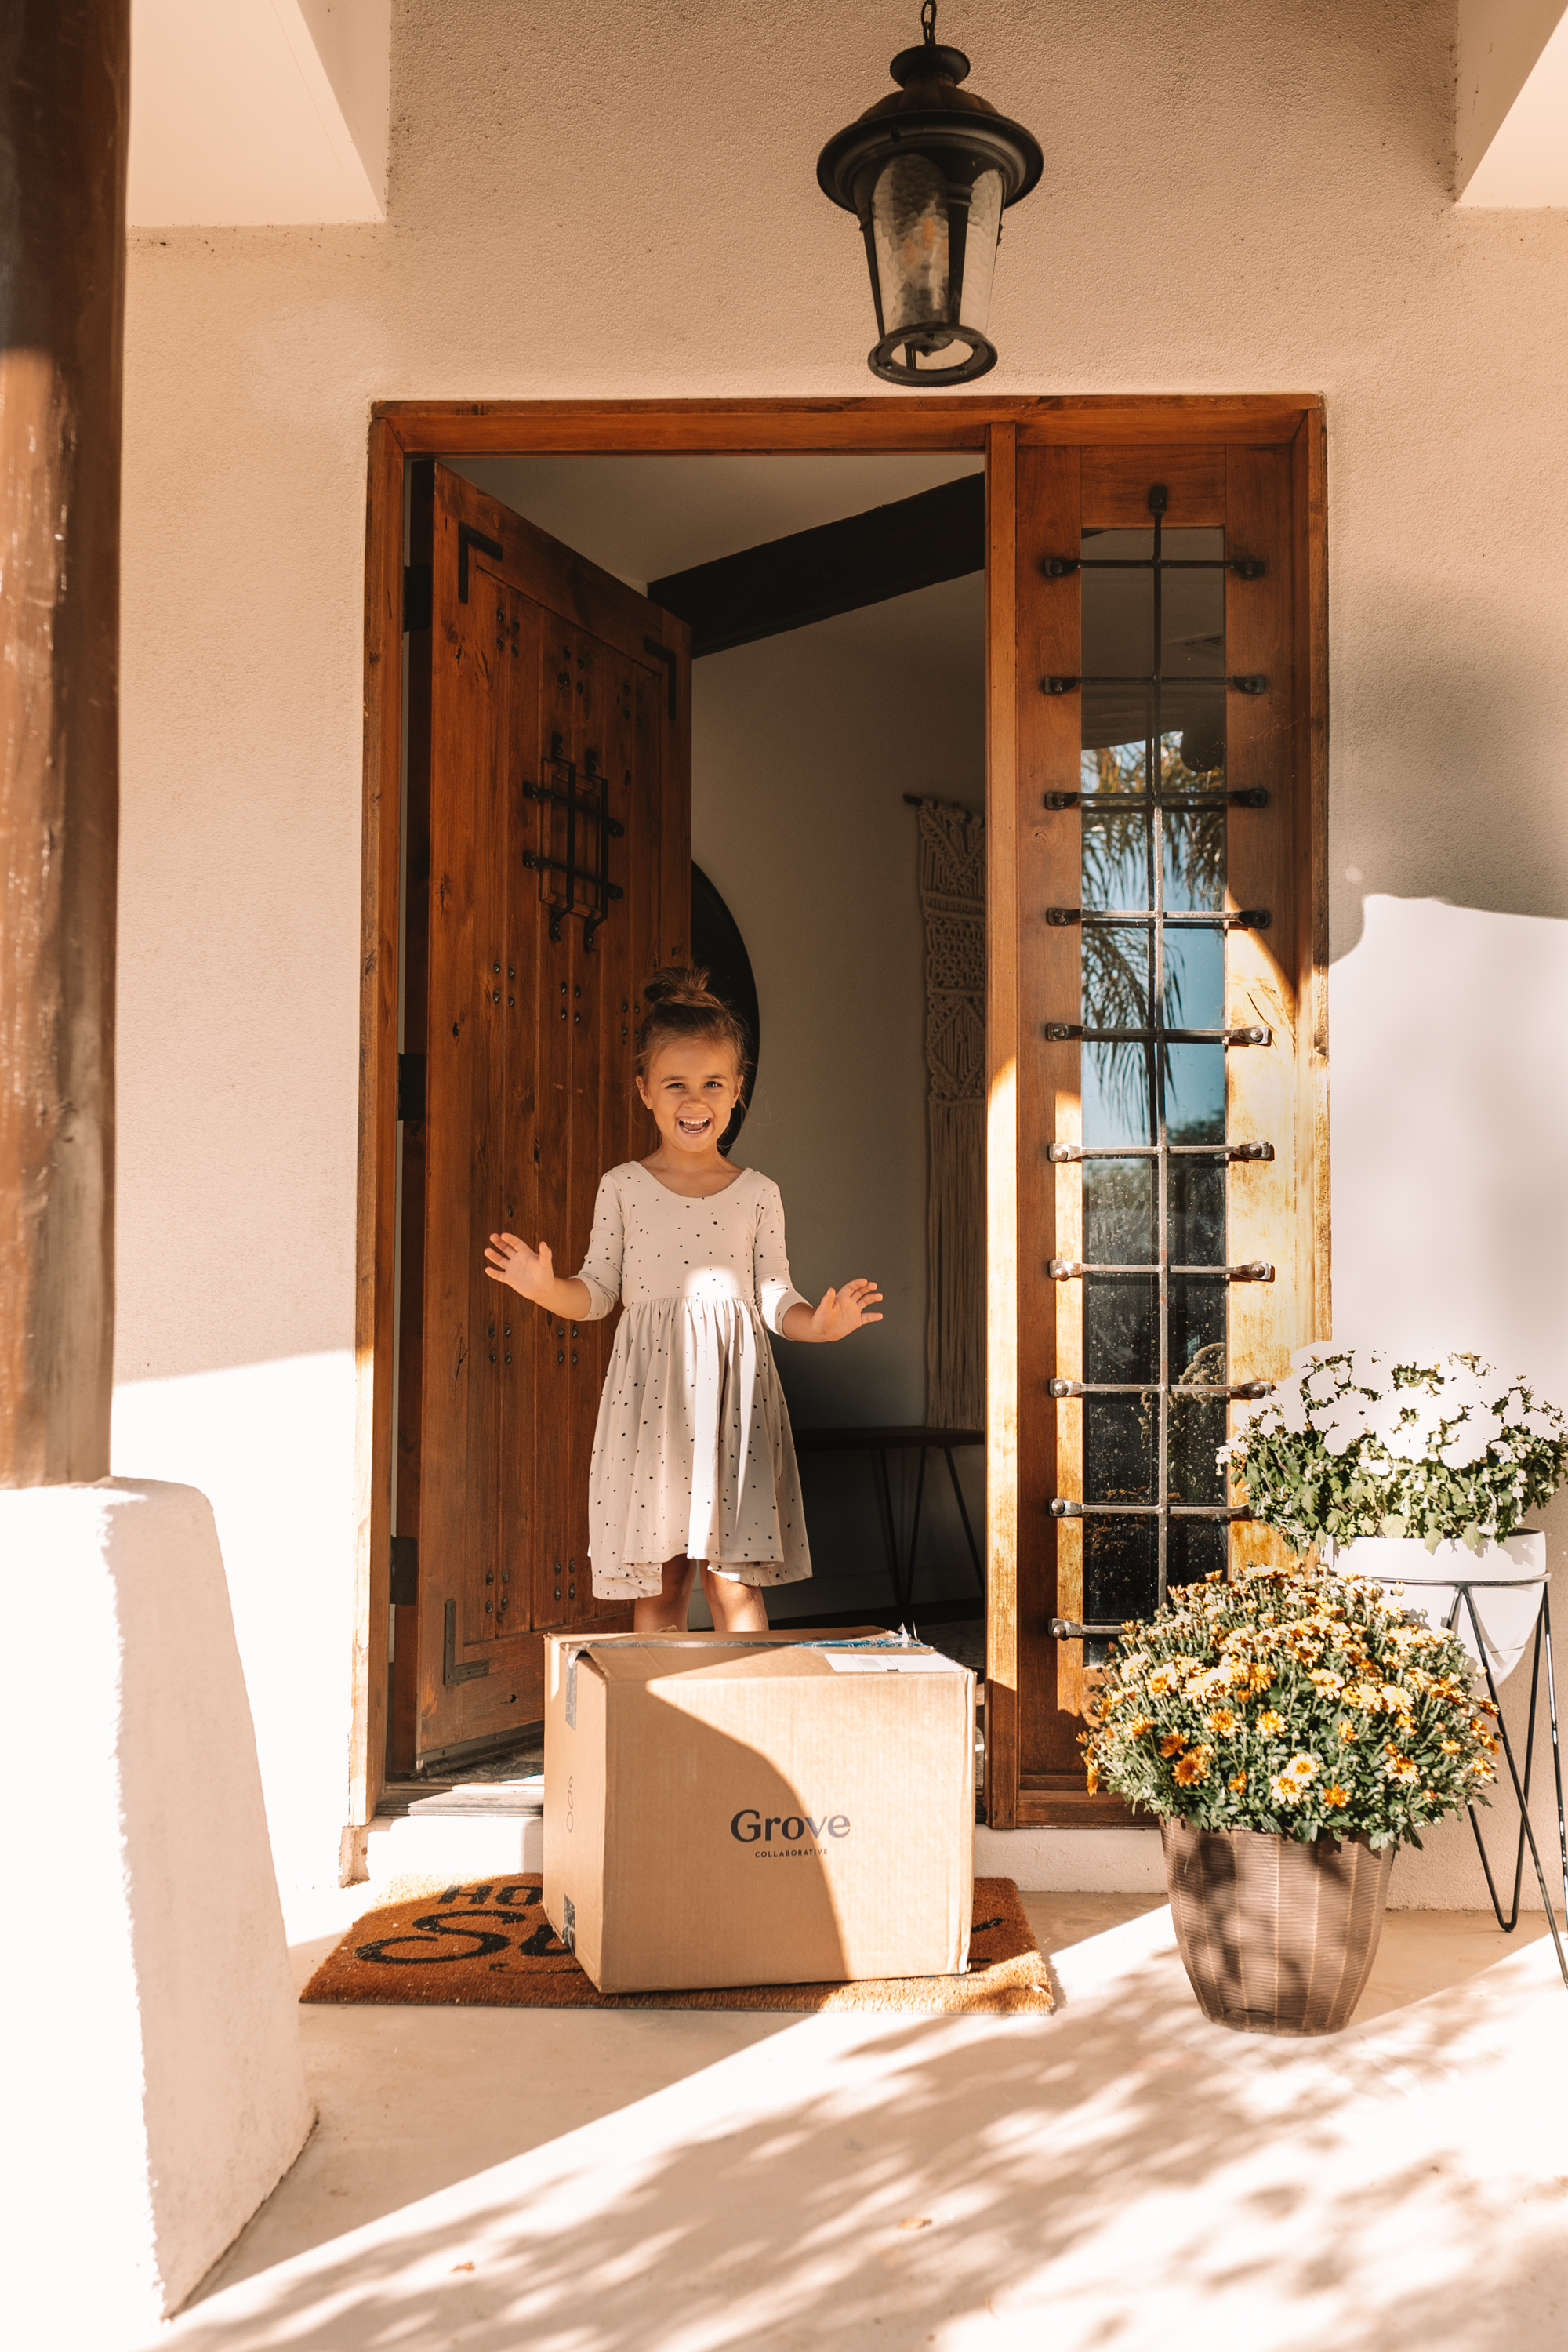 healthy and sustainable products for home, delivered right to our door from Grove Collaborative! #thelovedesignedlife #grovecollaborative #healthyliving